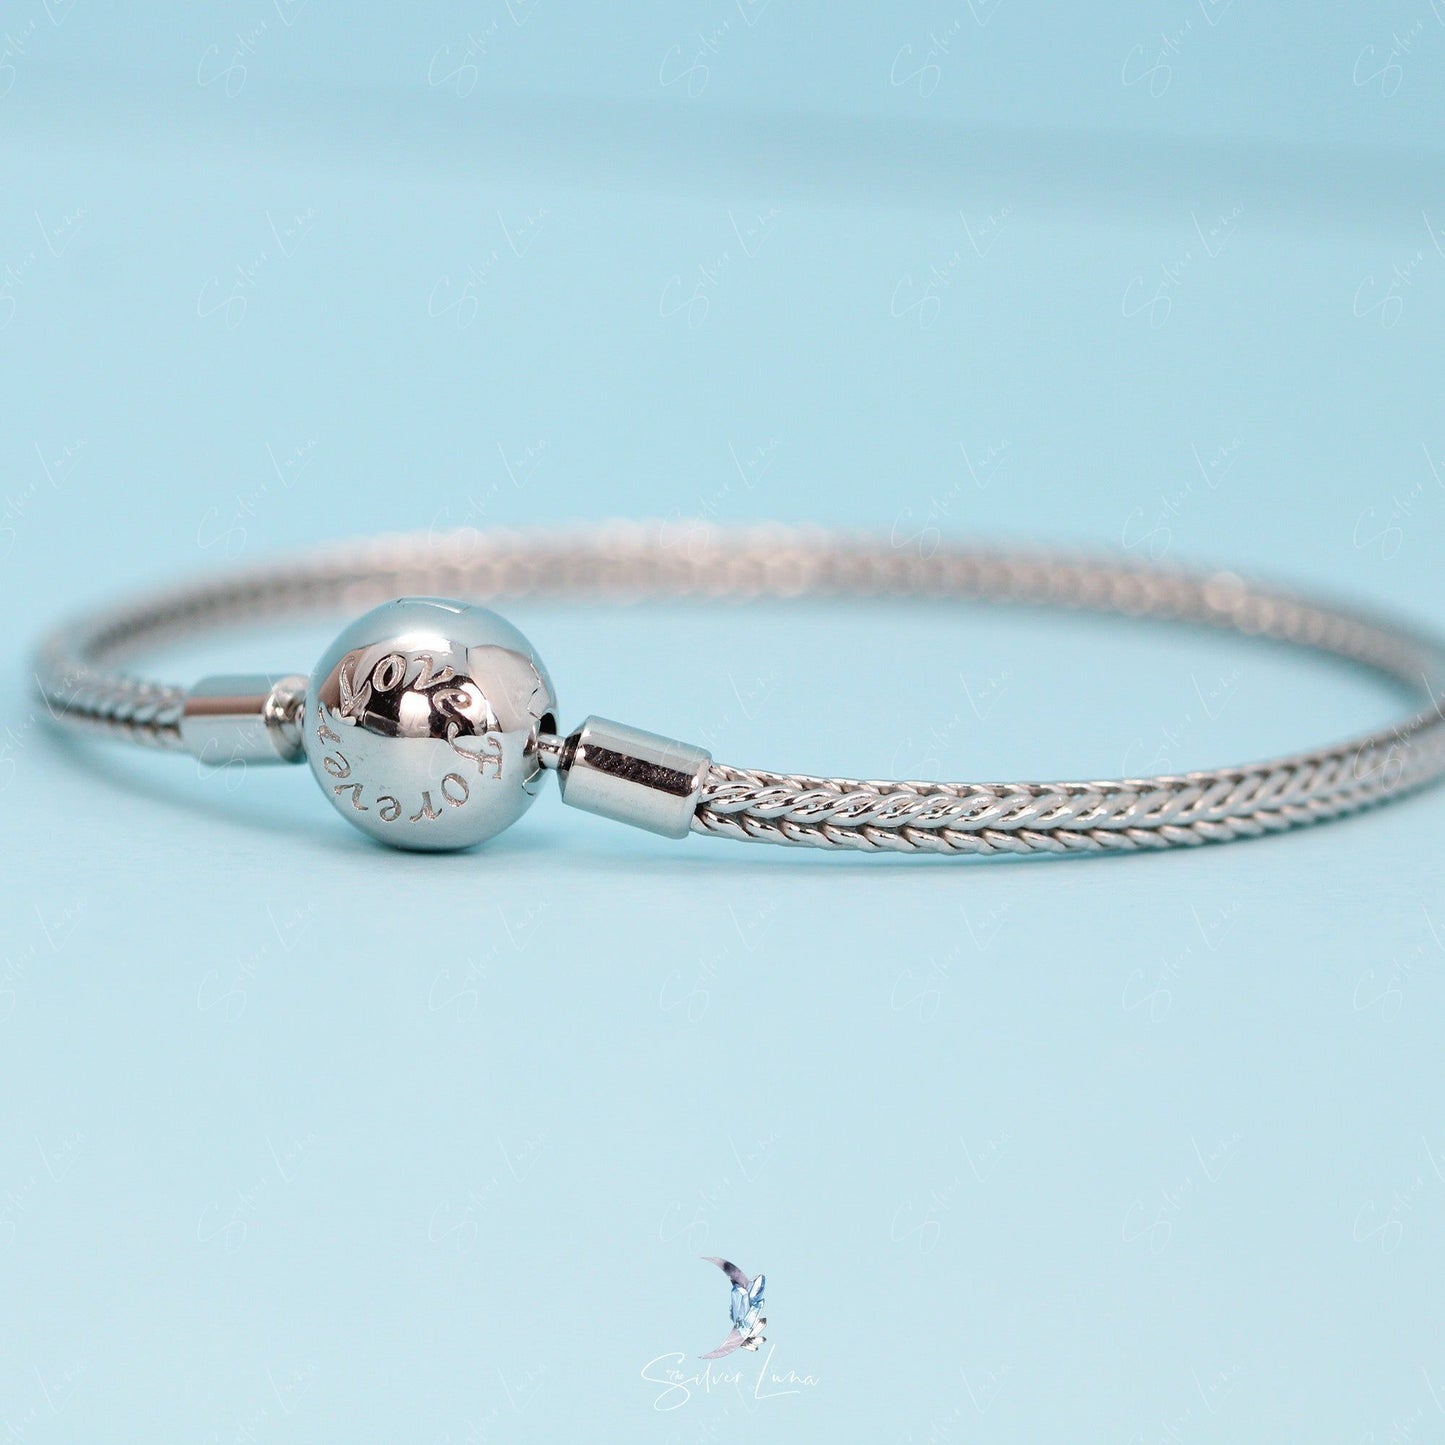 Soft chain sterling silver bracelet for charms